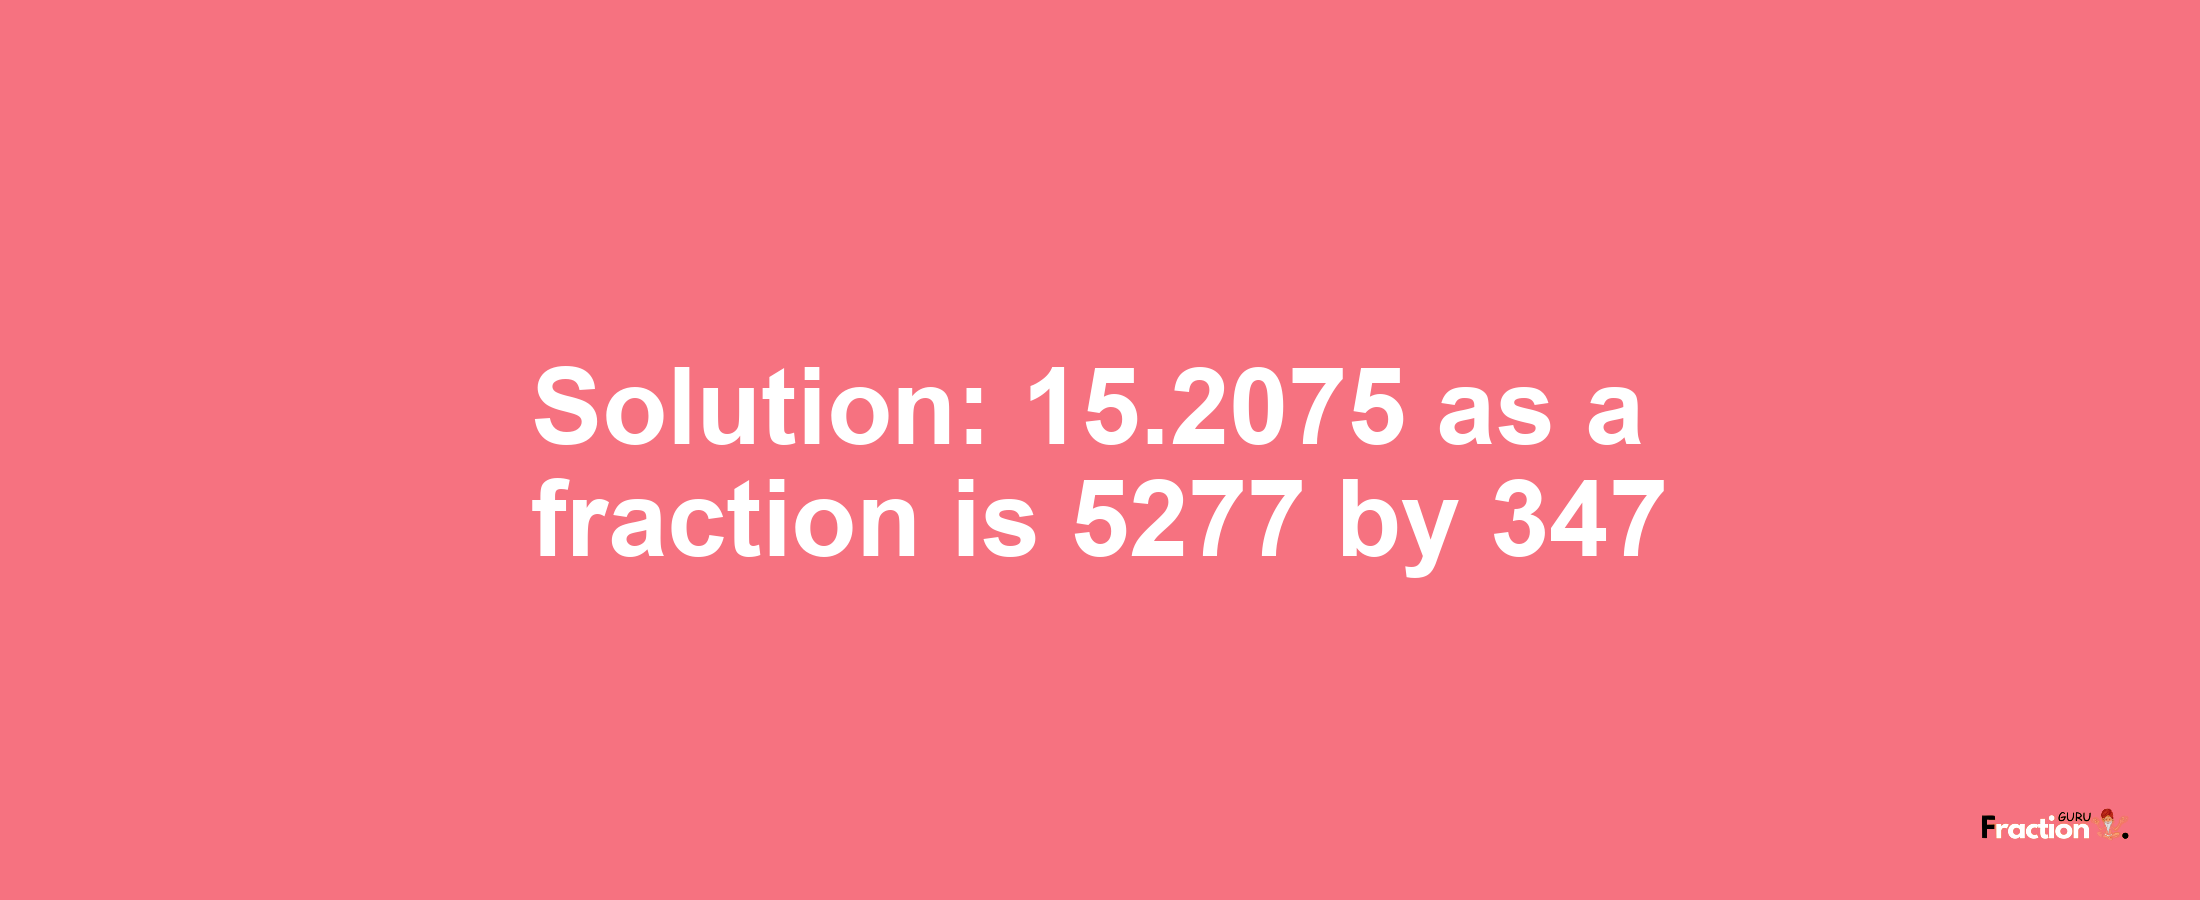 Solution:15.2075 as a fraction is 5277/347